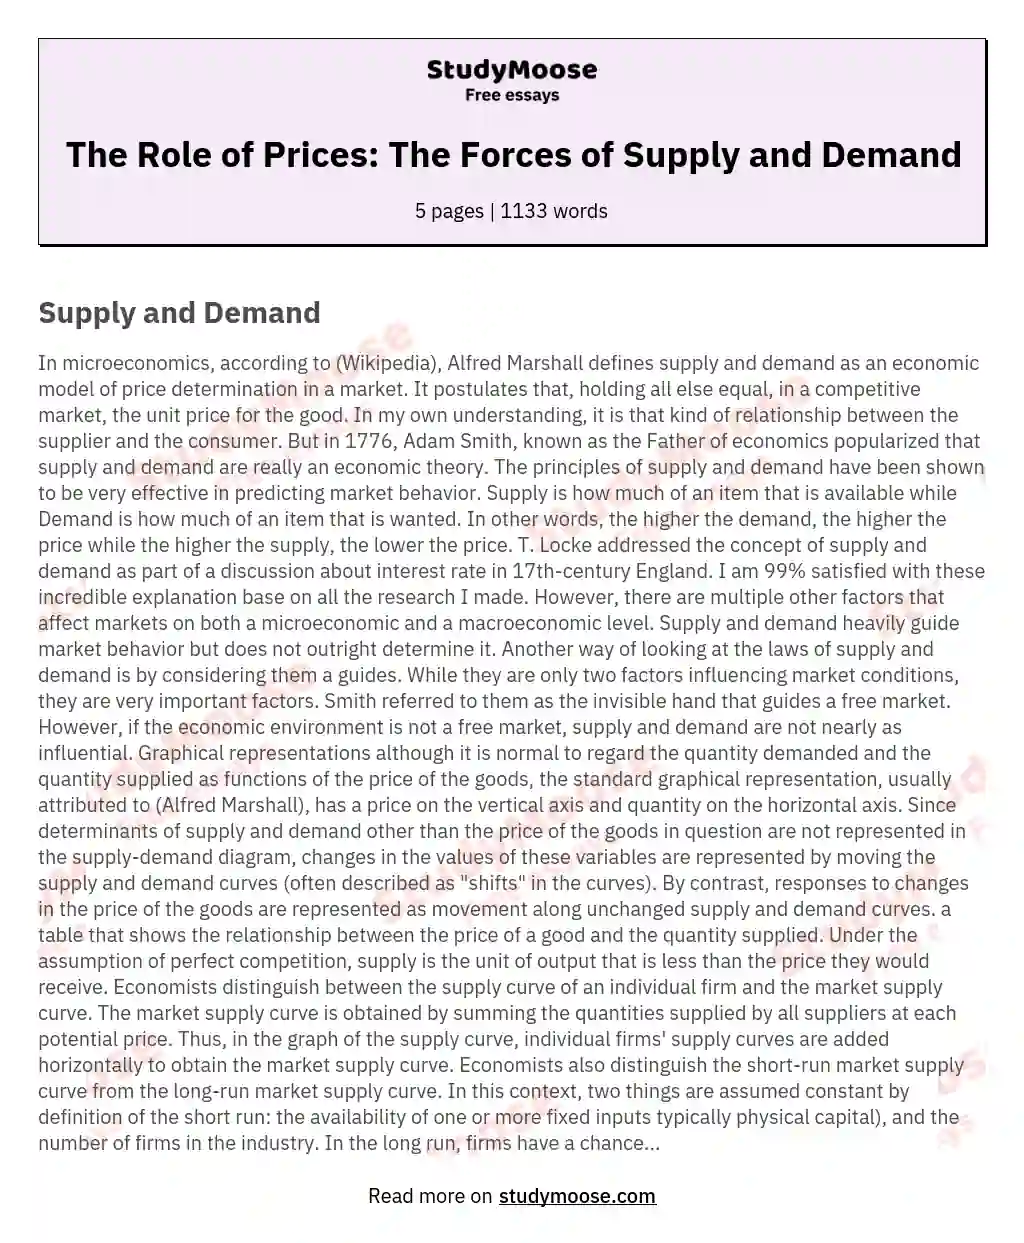 The Role of Prices: The Forces of Supply and Demand essay